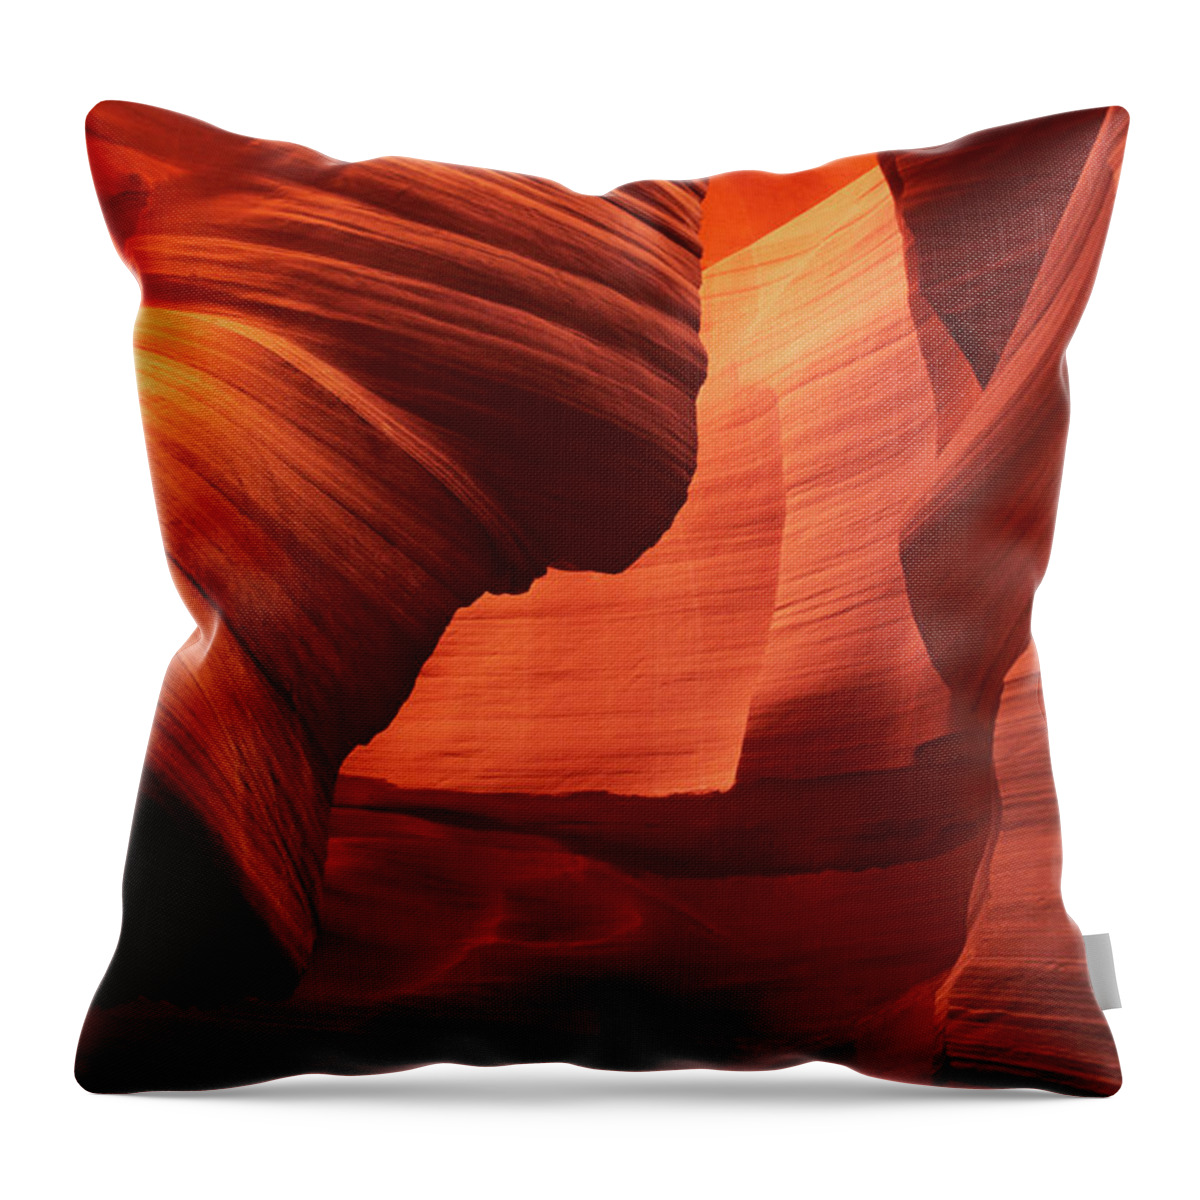 North America Throw Pillow featuring the photograph Sculpted Sandstone Upper Antelope Slot Canyon Arizona by Dave Welling